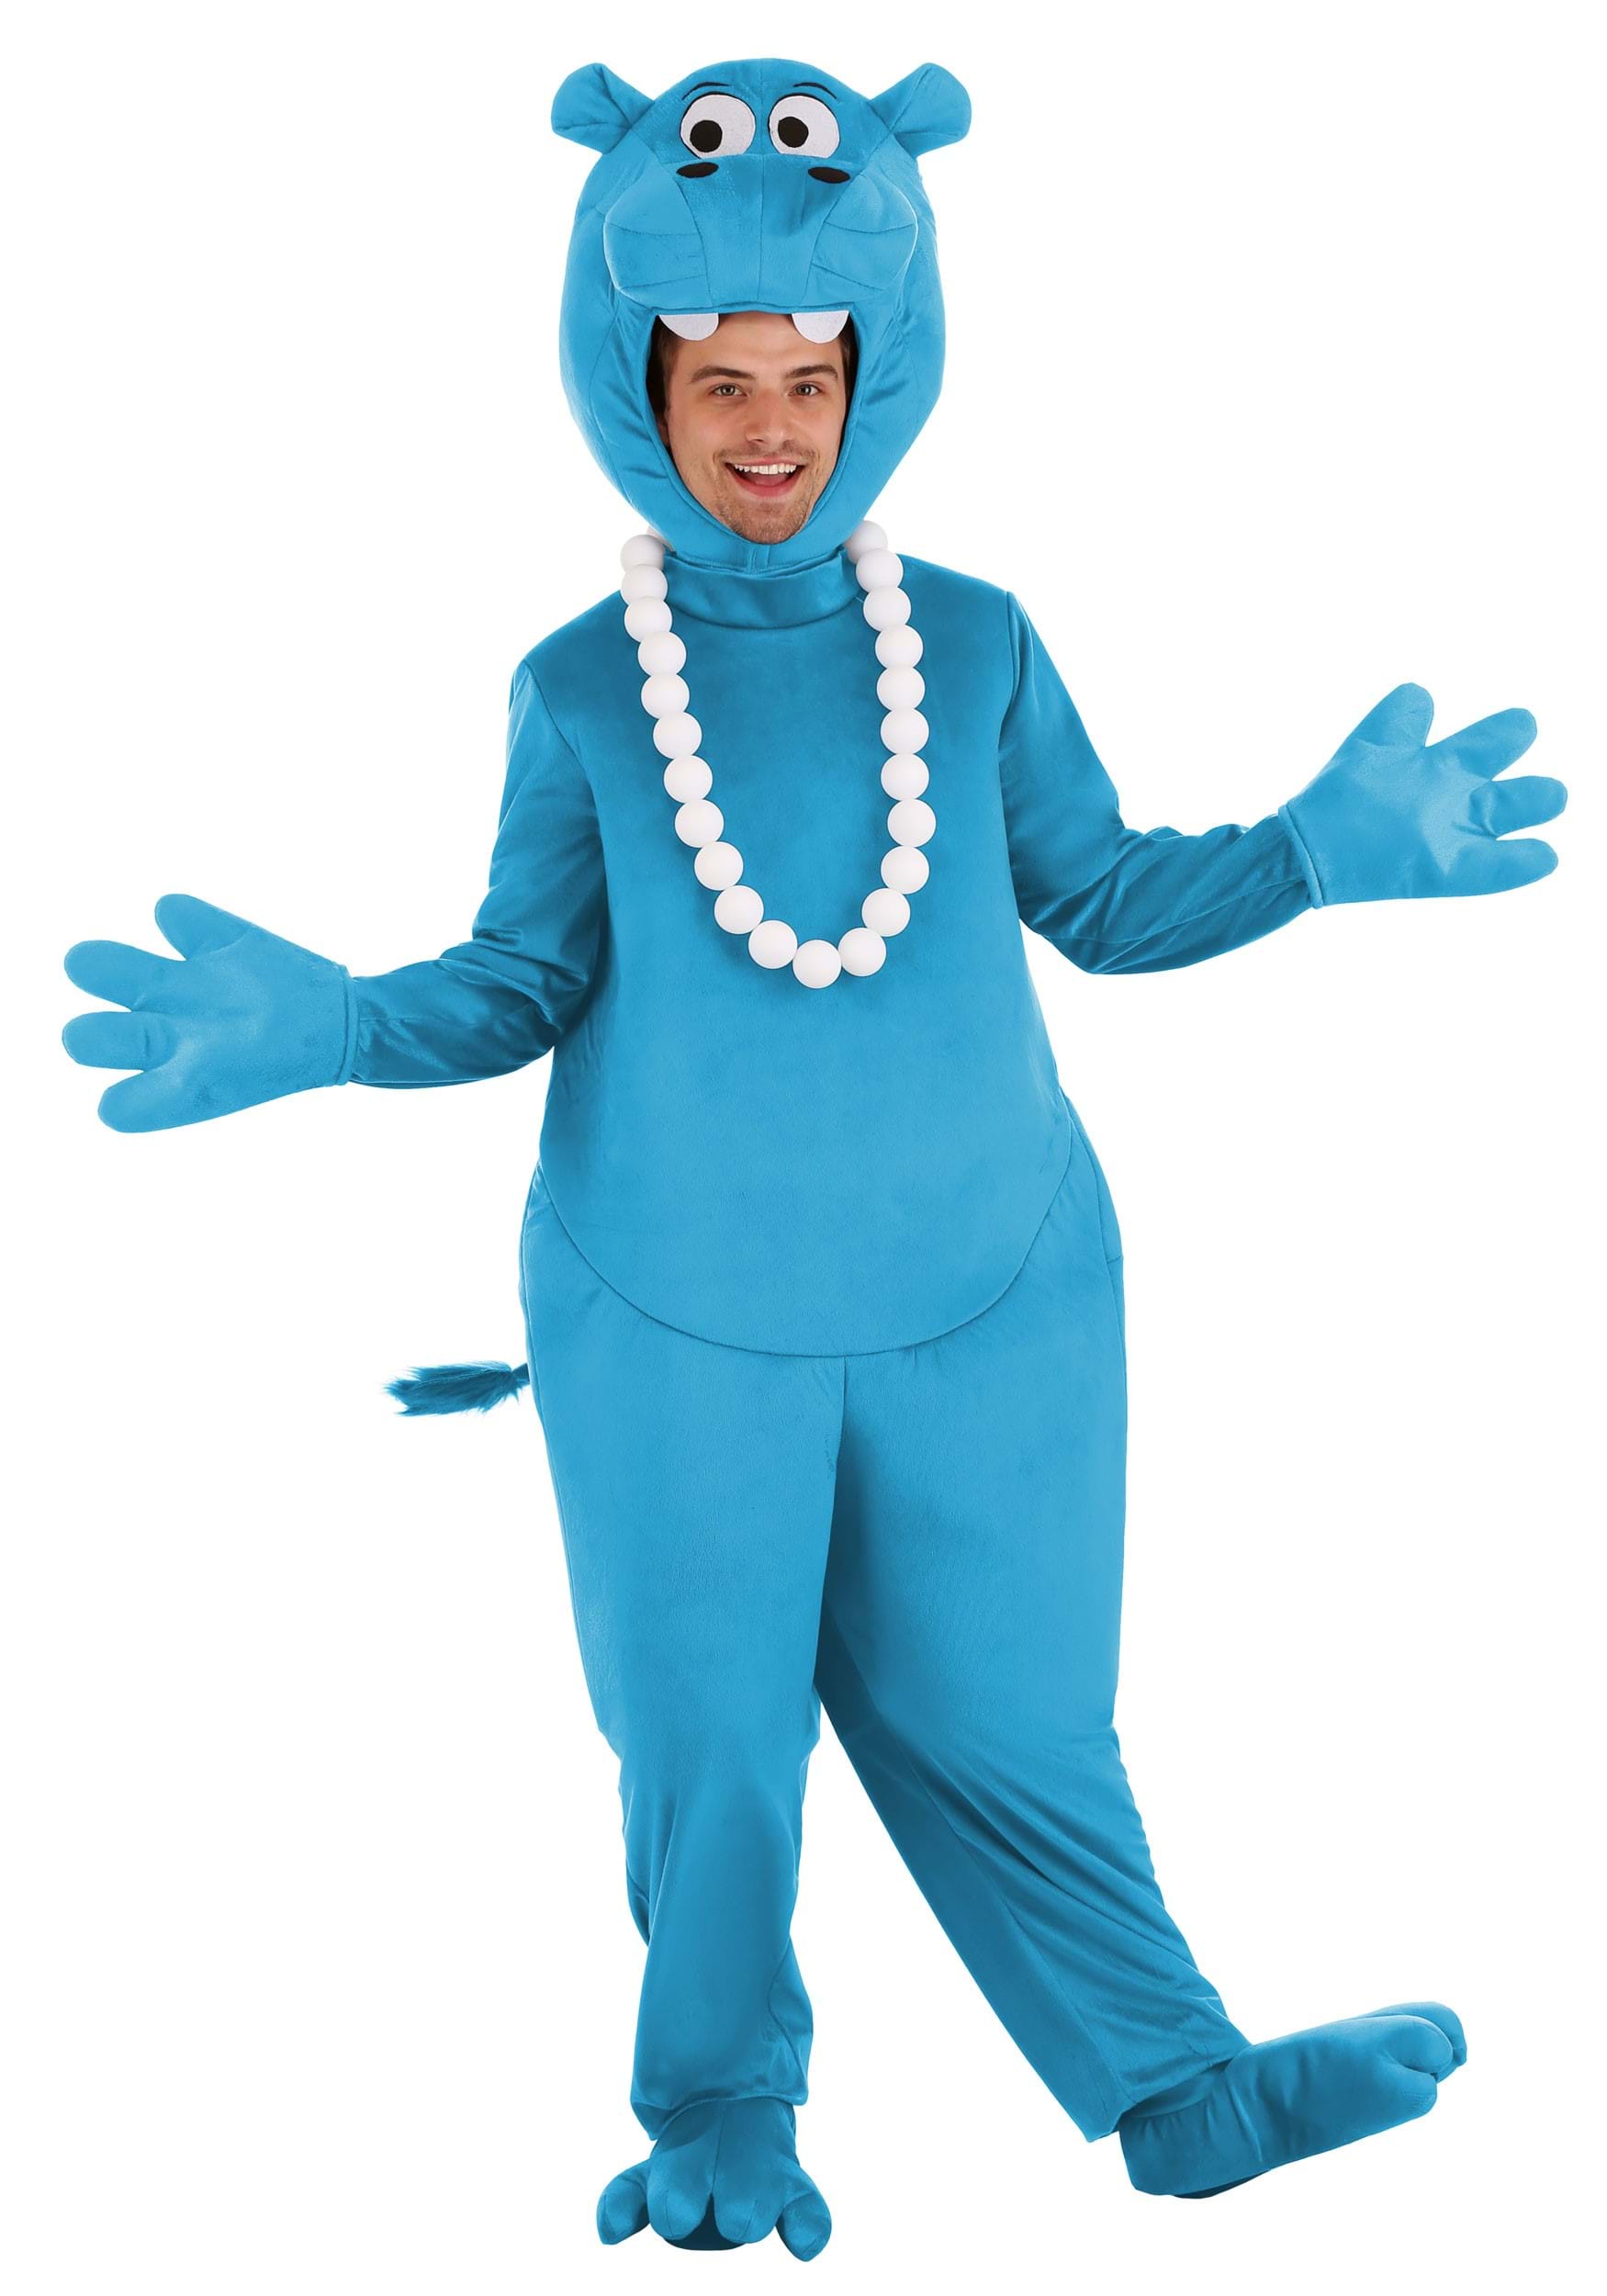 Photos - Fancy Dress Hasbro Blue Hungry Hungry Hippos Adult Costume Blue/White FUN1695AD 